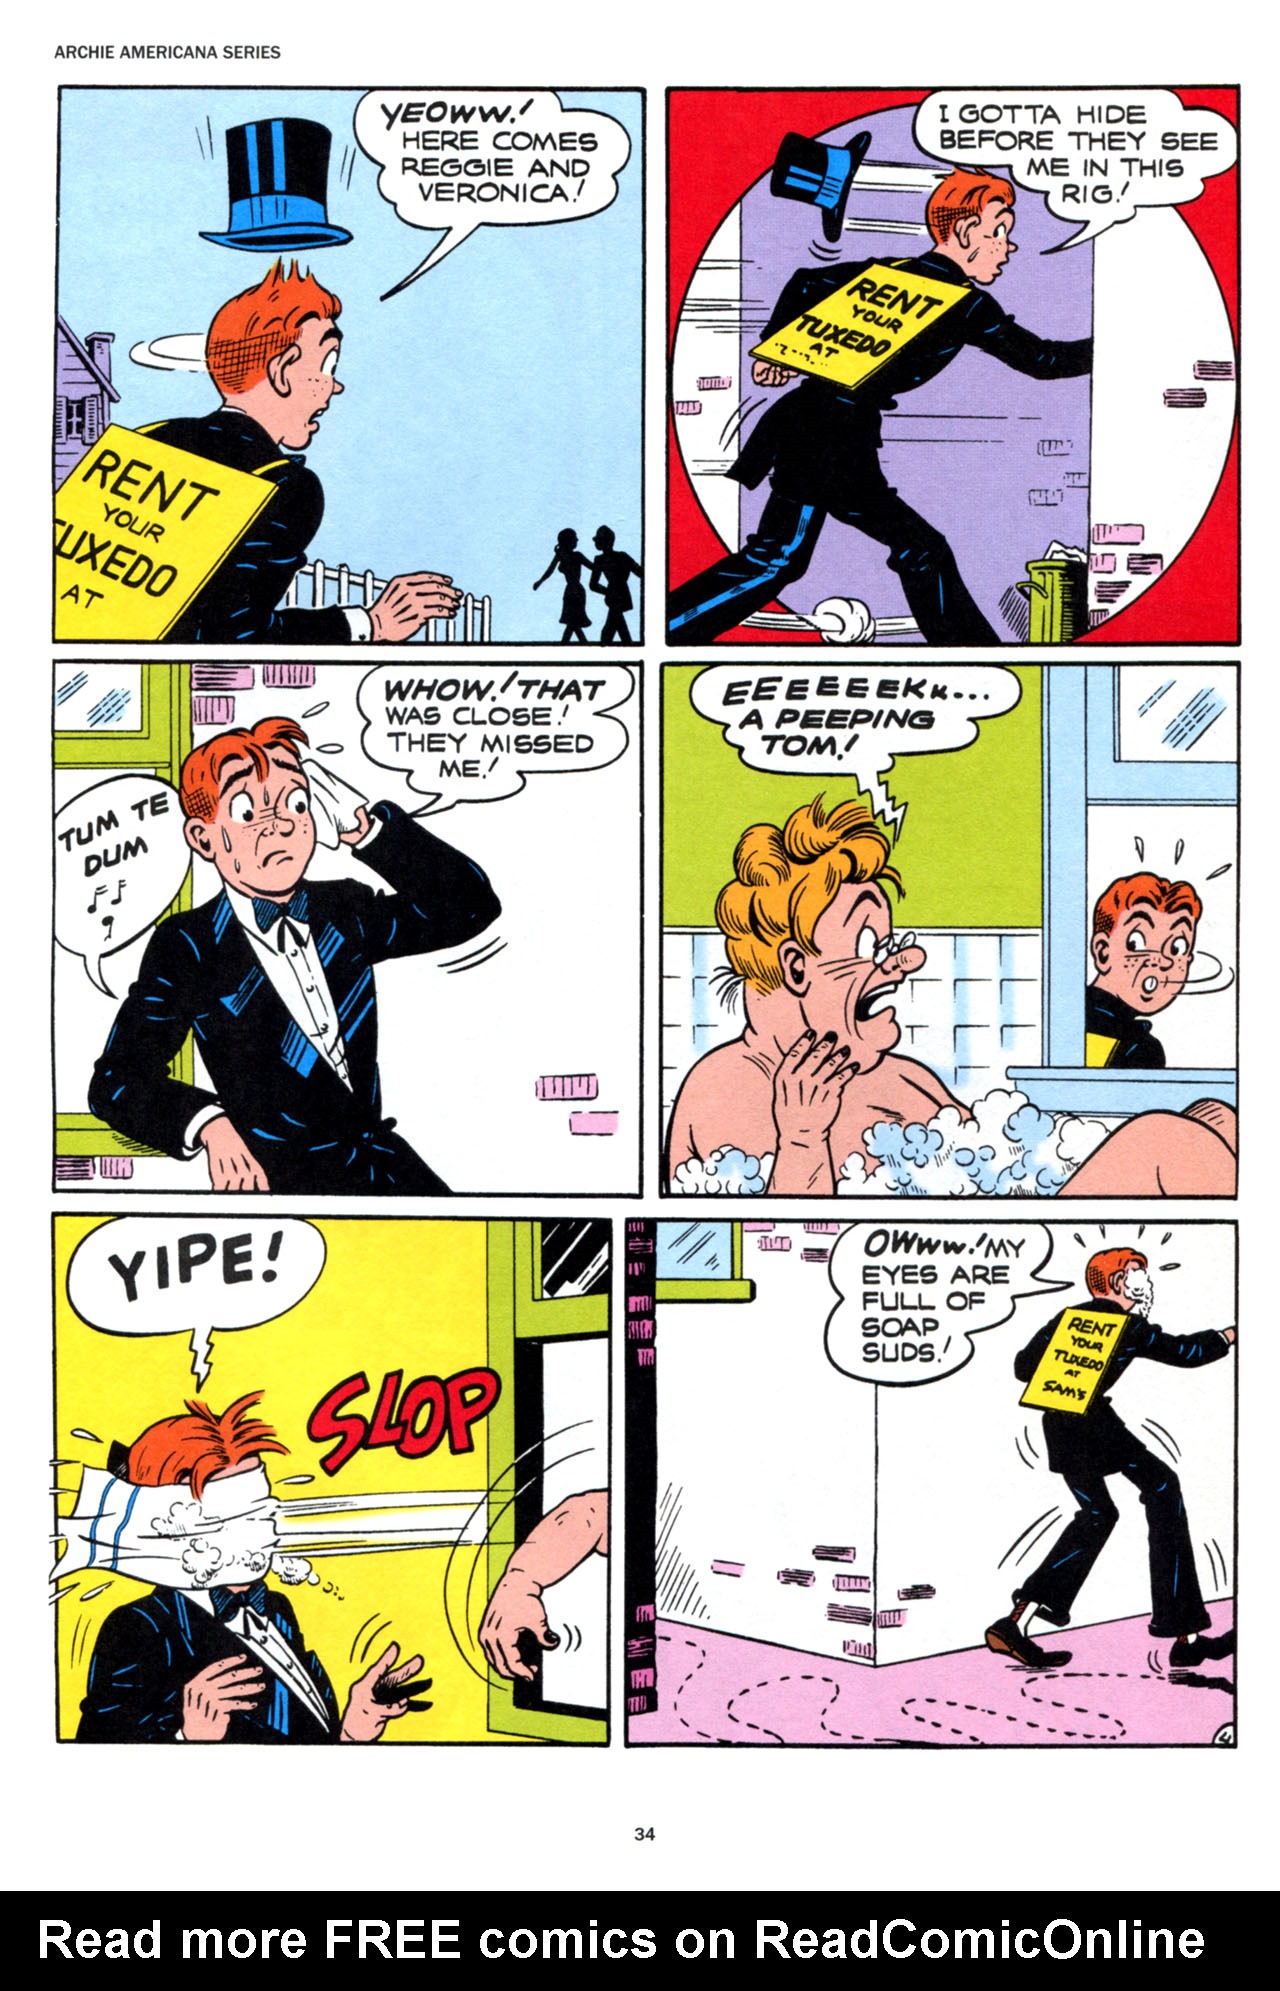 Read online Archie Americana Series comic -  Issue # TPB 6 - 35